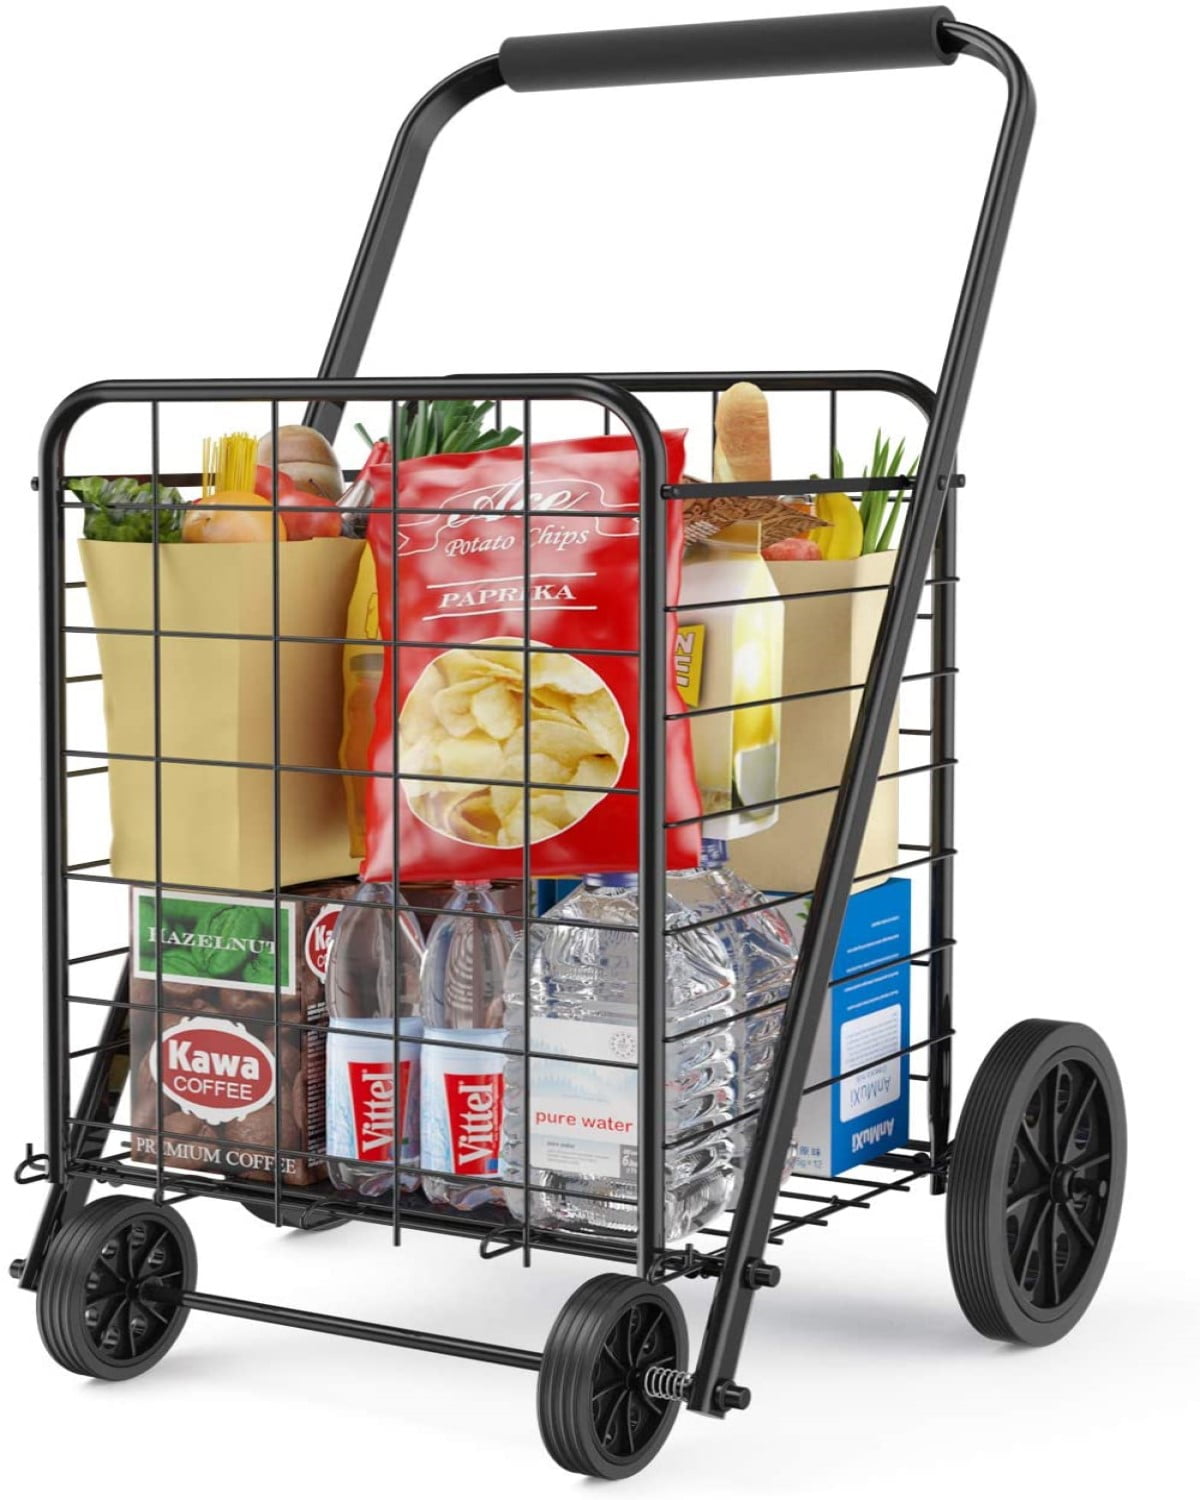 Grocery Cart with 4 PUSH version Sold Direct from Manufacturer Durable Strong and Stable for Walking Wheels, Little Donkee Folding Shopping or Leisure Trolley Weatherproof 8